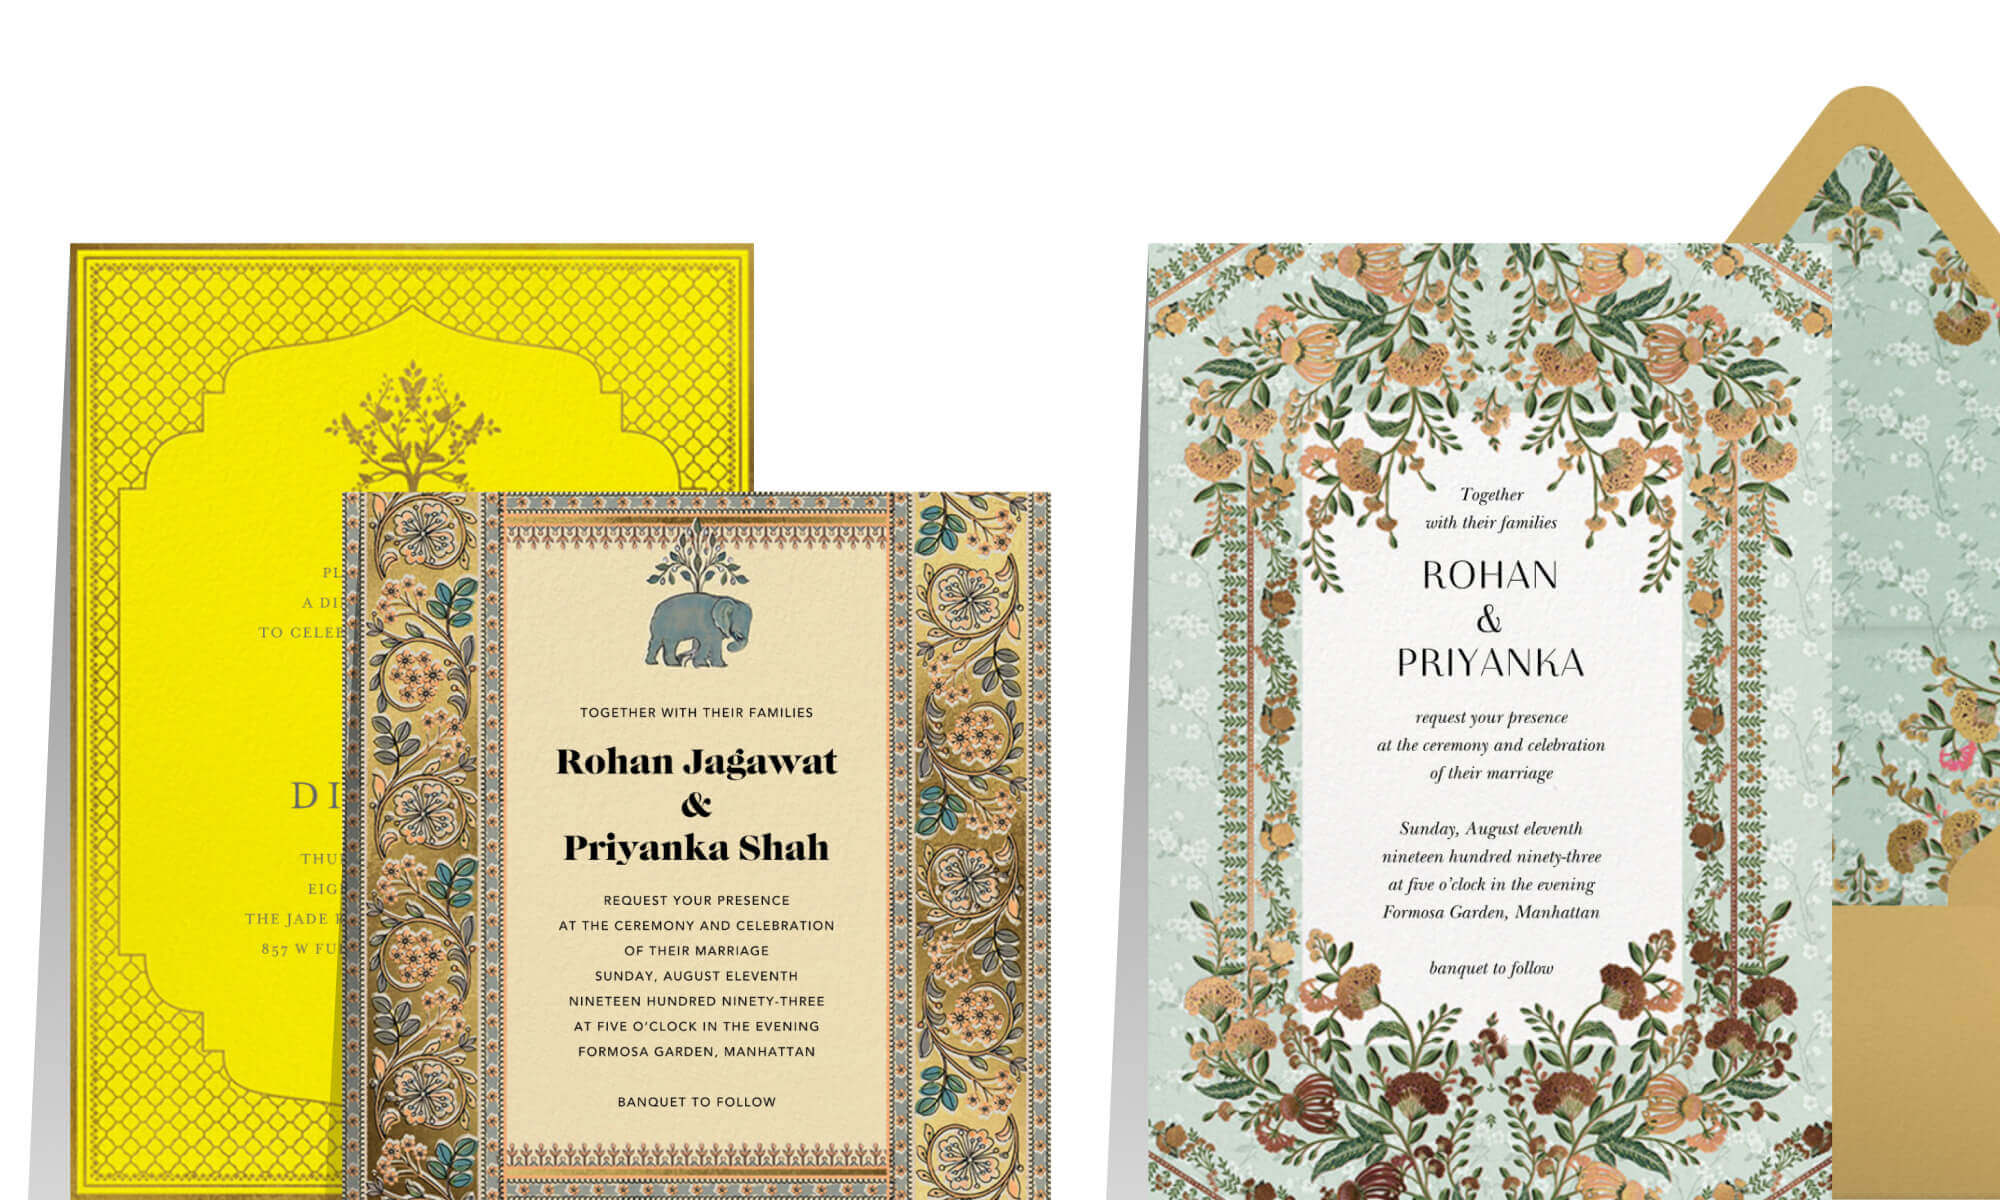 Three Anita Dongre invitations featuring designs evocative of her wedding prints.